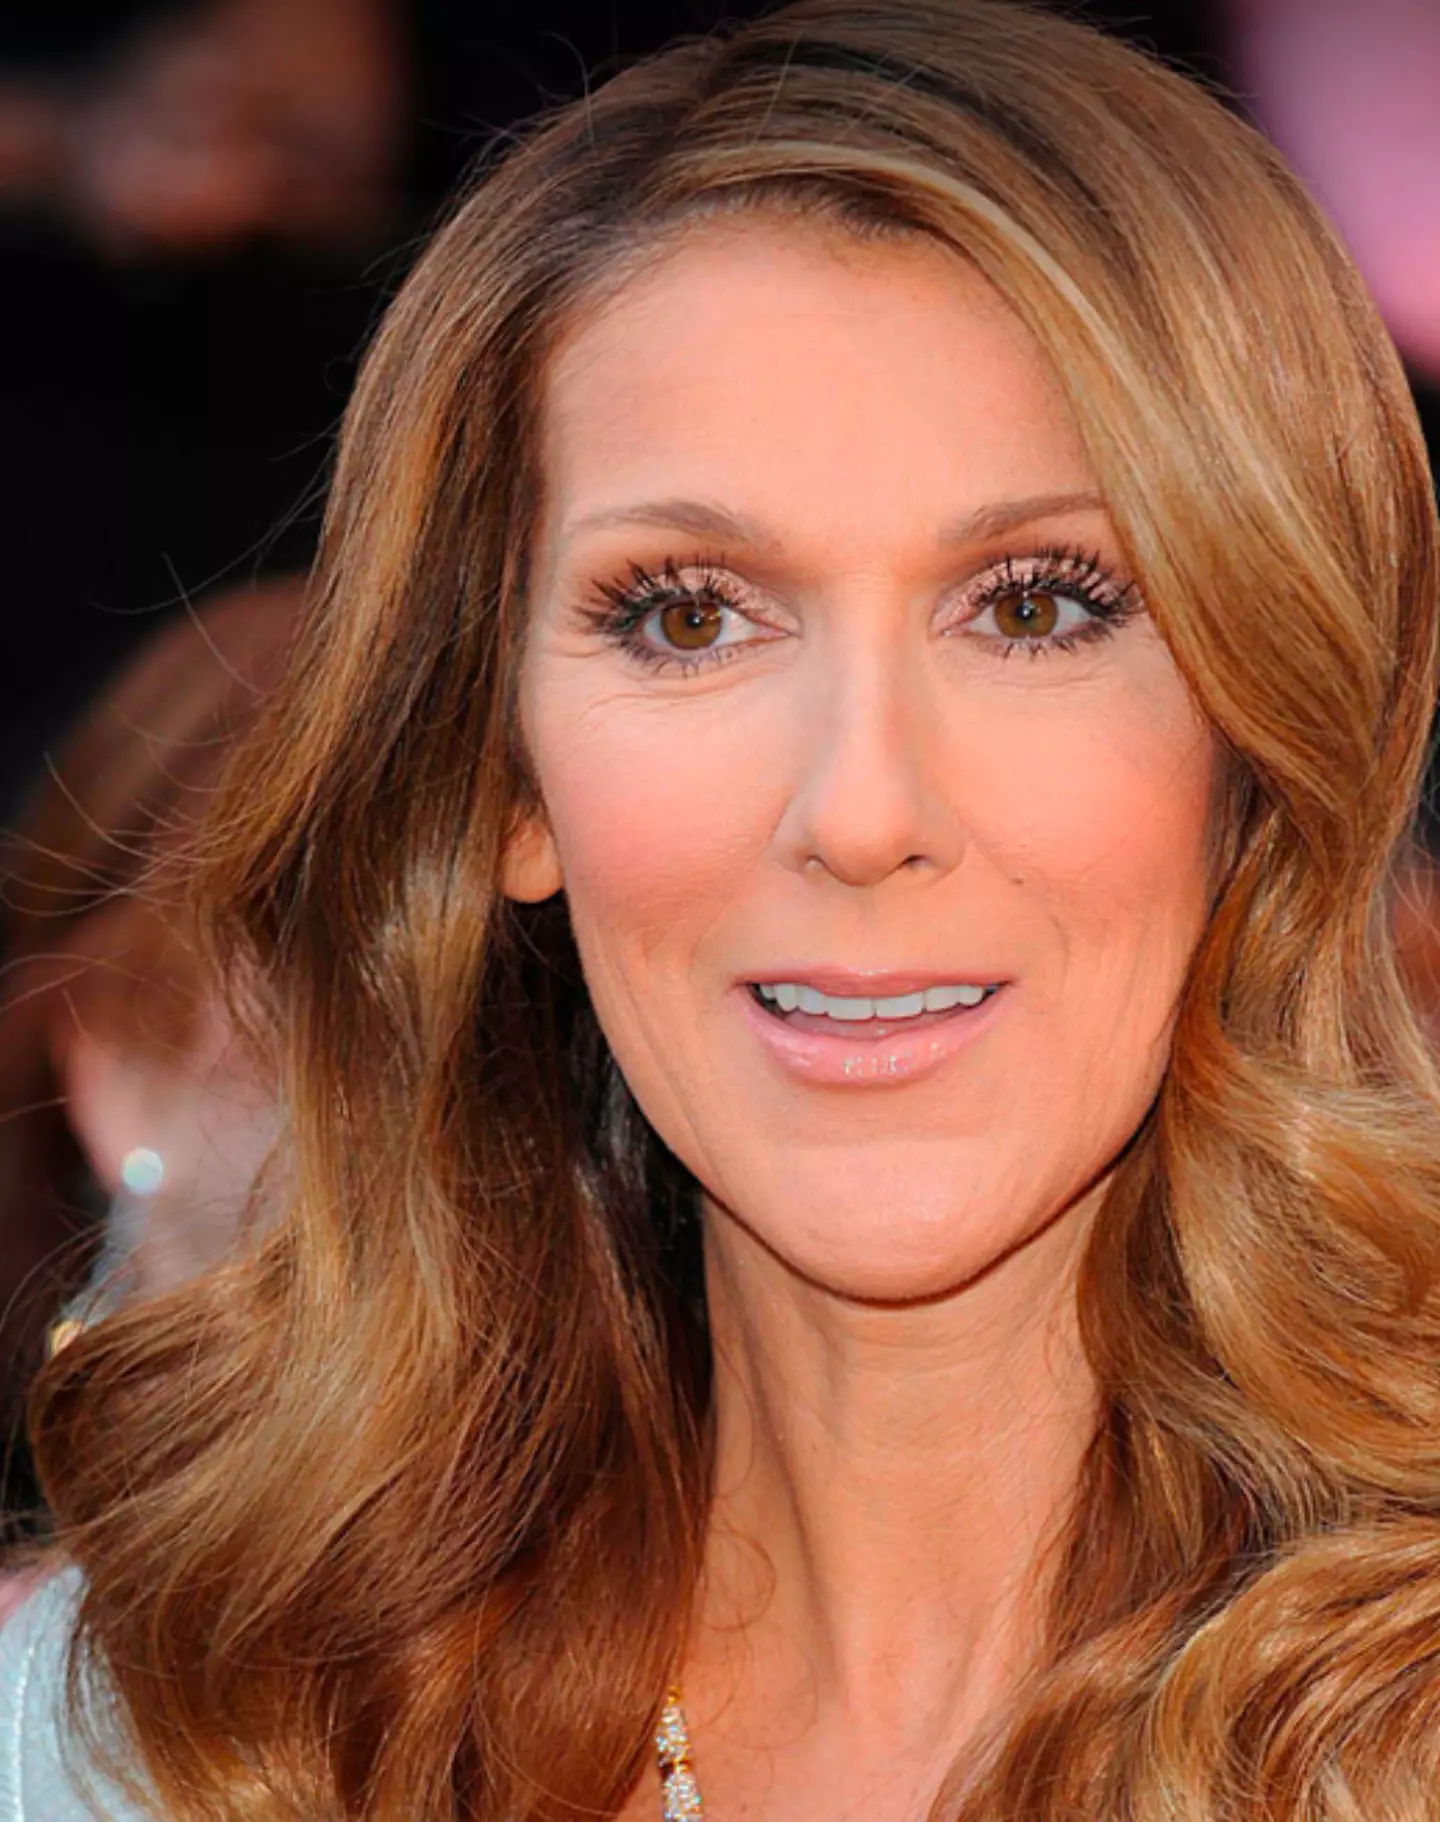 Celine Dion has cancelled her entire world tour over a health battle.